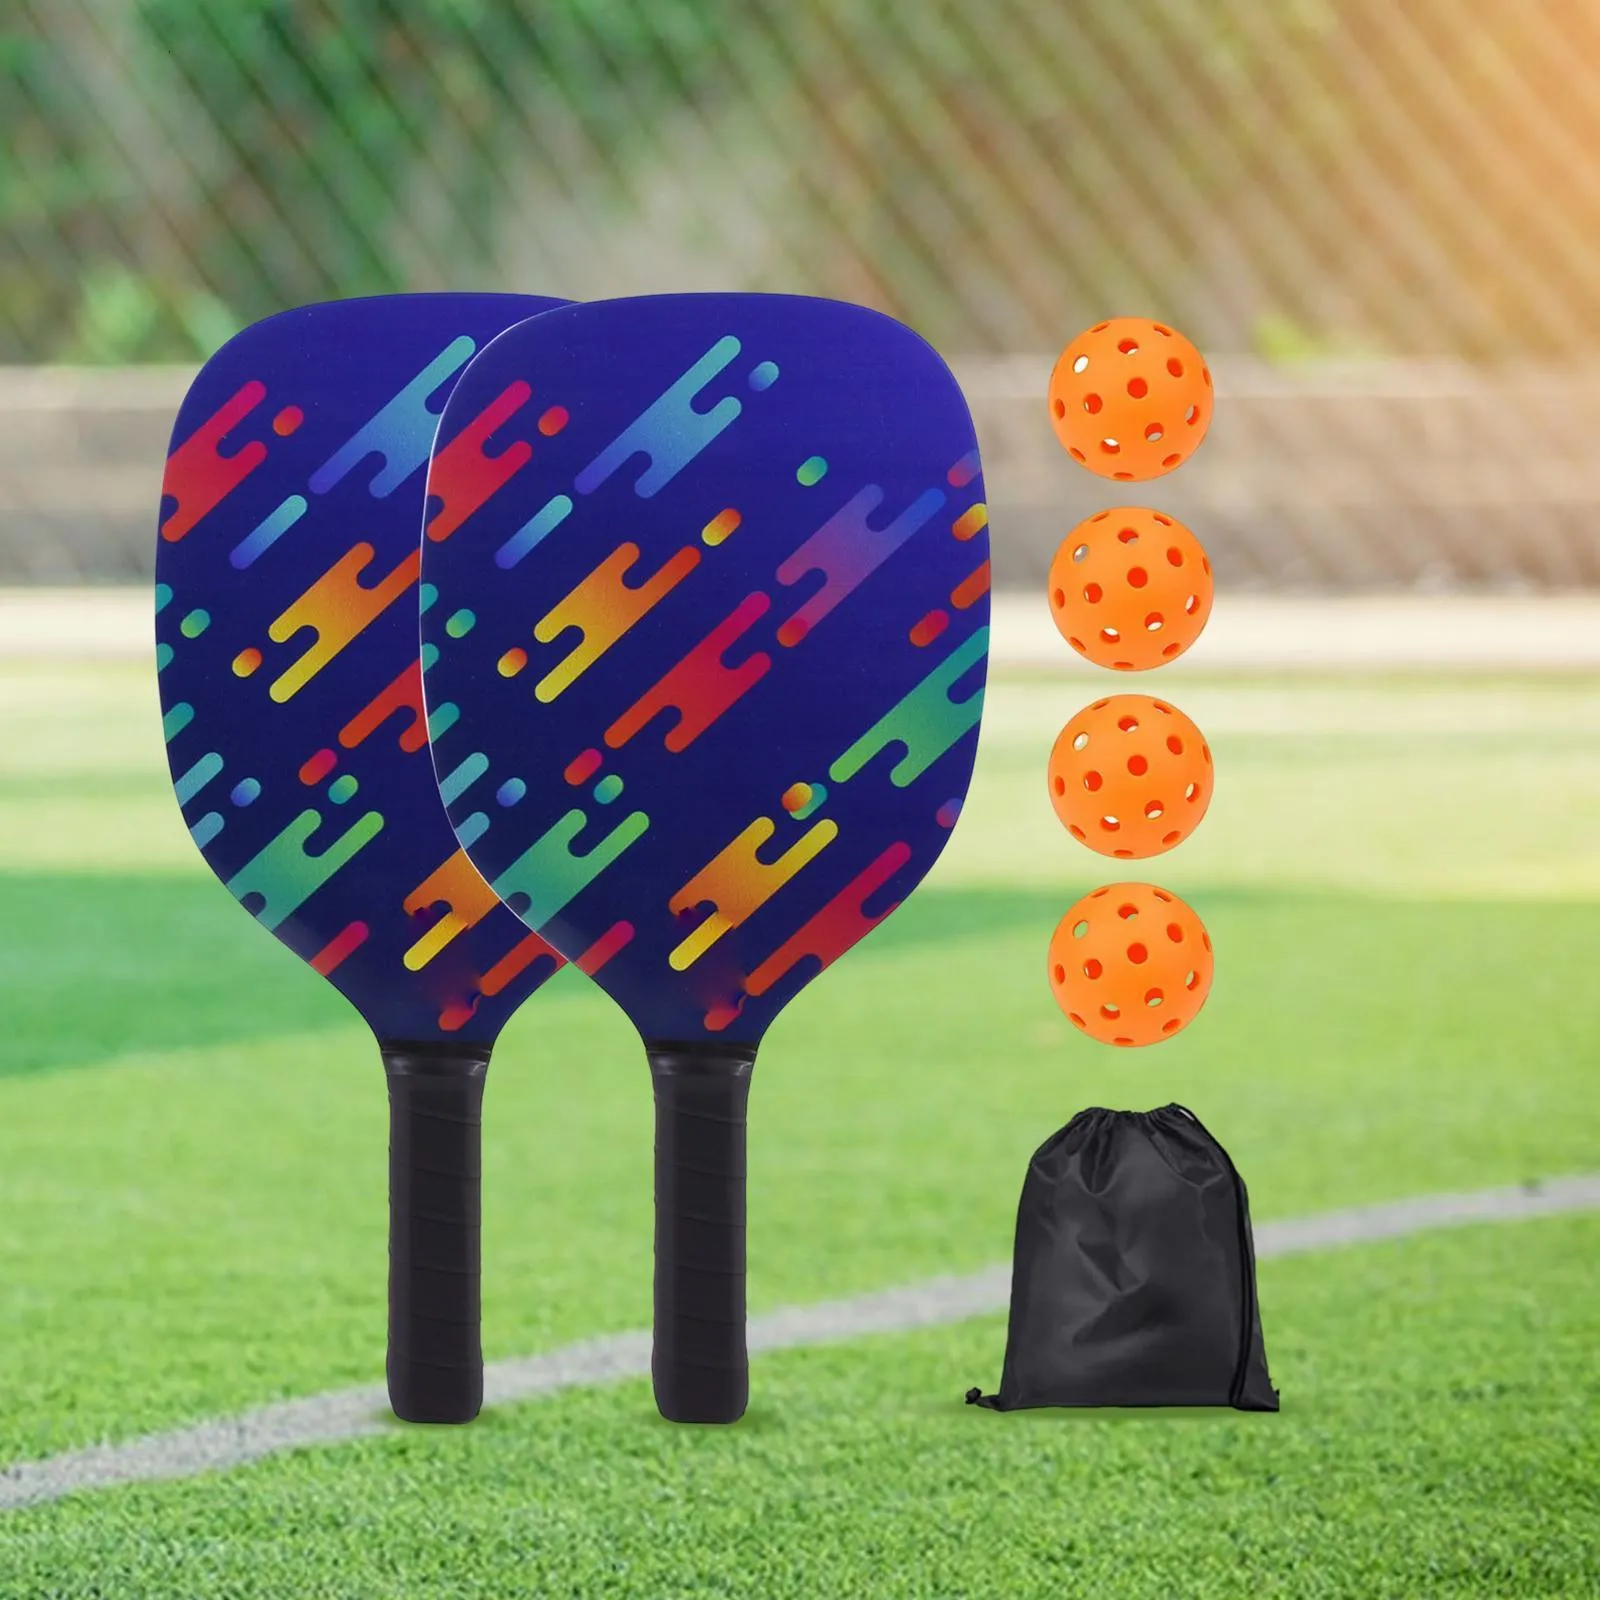 Professional Pickleball Paddles Set of 2 Rackets with 4 Balls Carry Bag with Comfort Grip Wood for Indoor Outdoor Women Sports